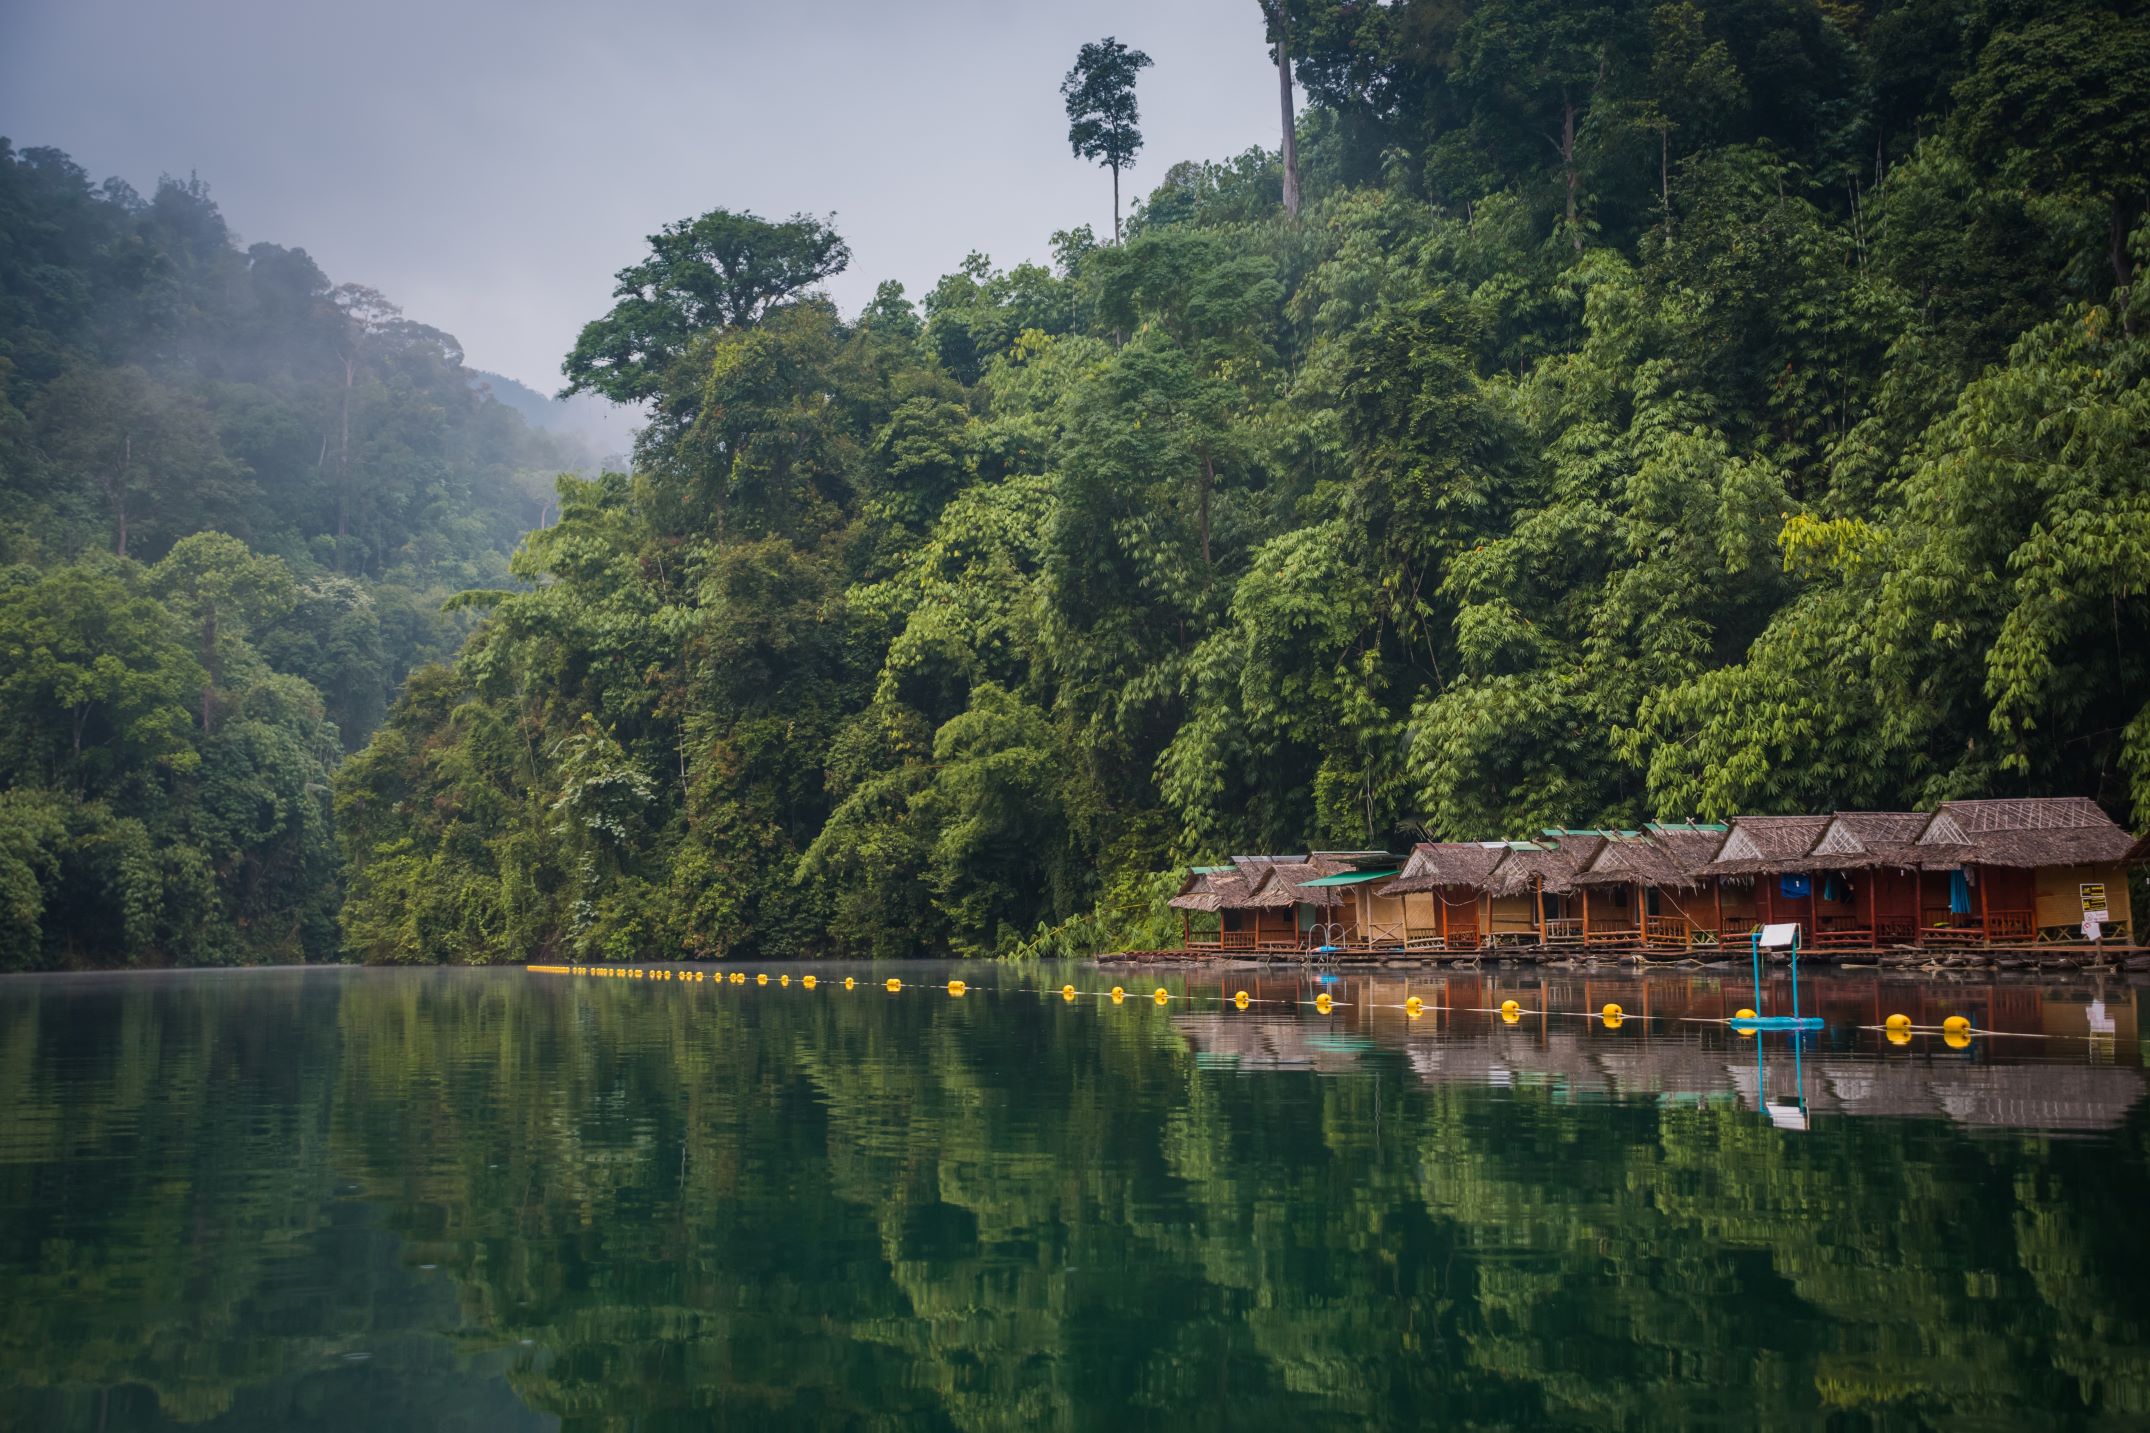 An image of Thailand - a lake and alot of trees.